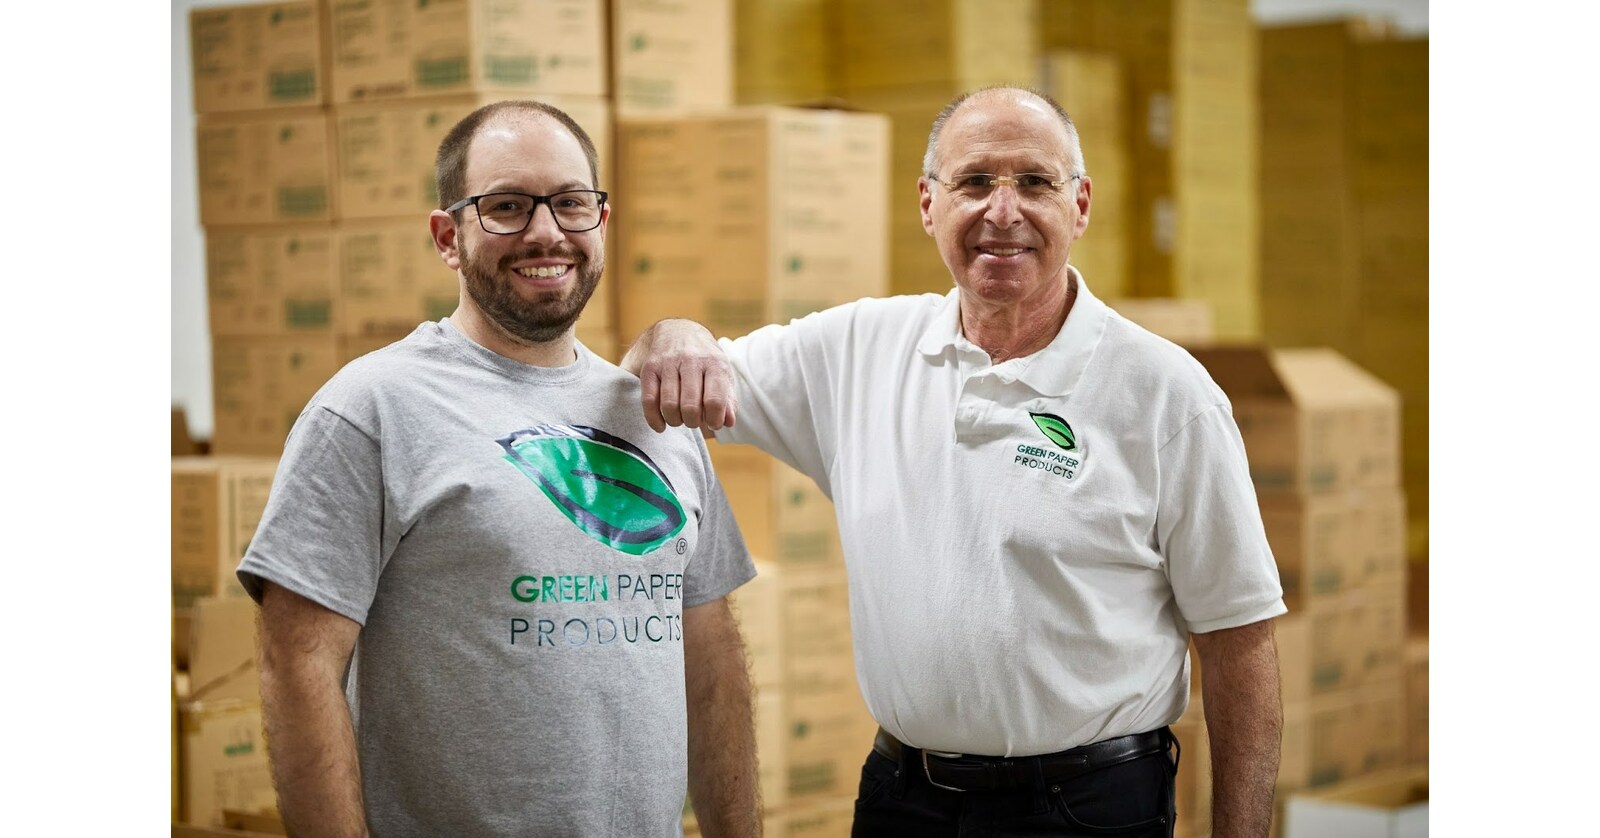 Green Paper Products is ready to grow